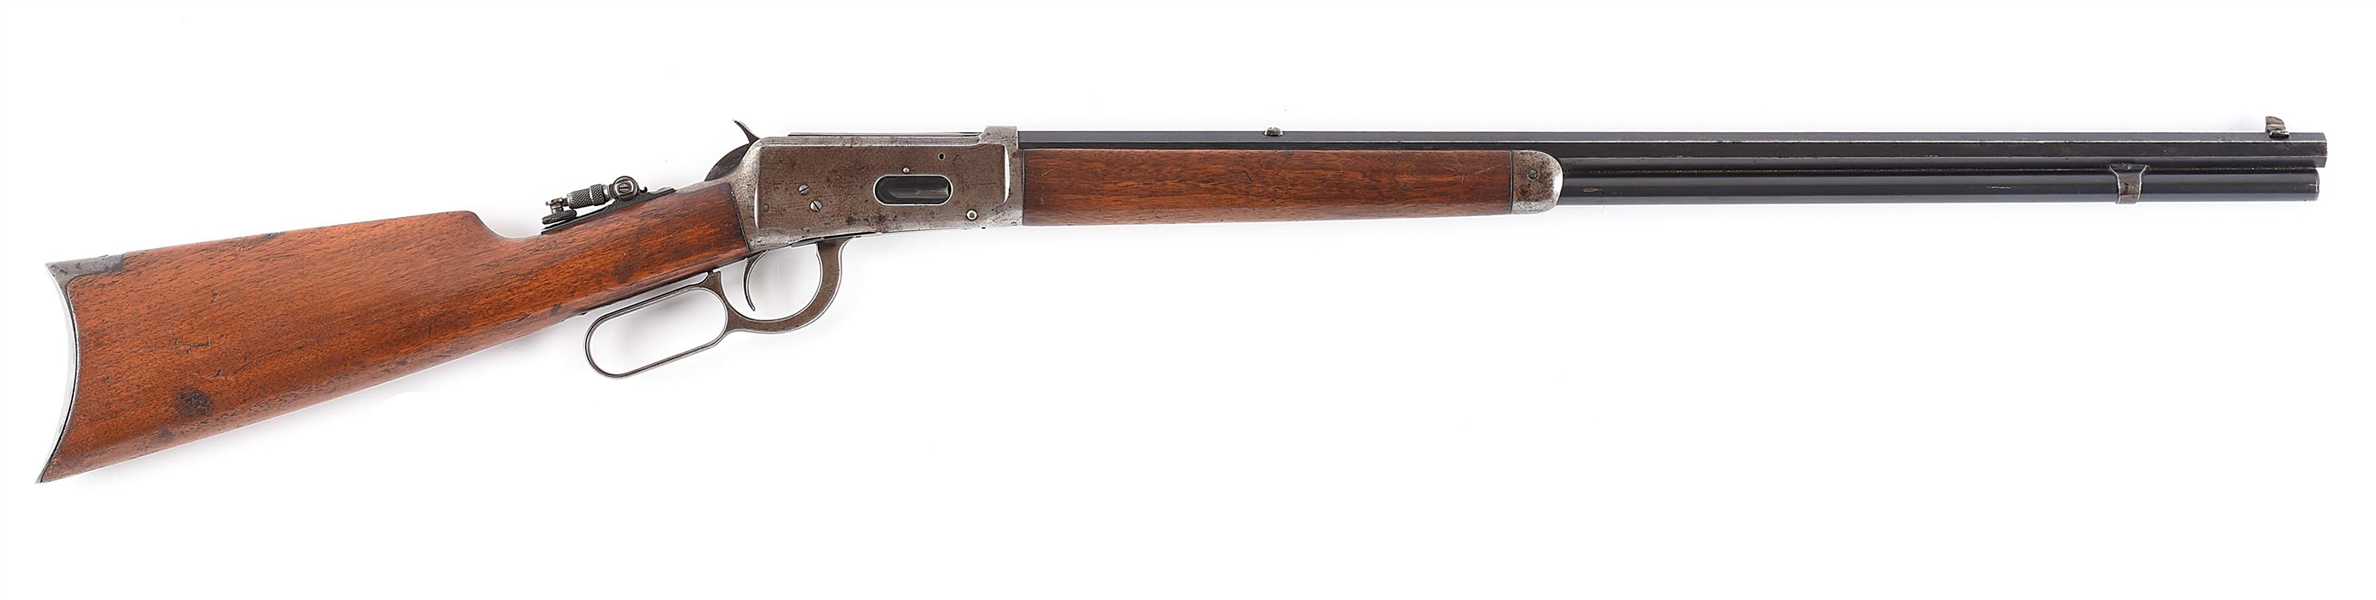 (C) WINCHESTER MODEL 1894 LEVER ACTION RIFLE (1909).